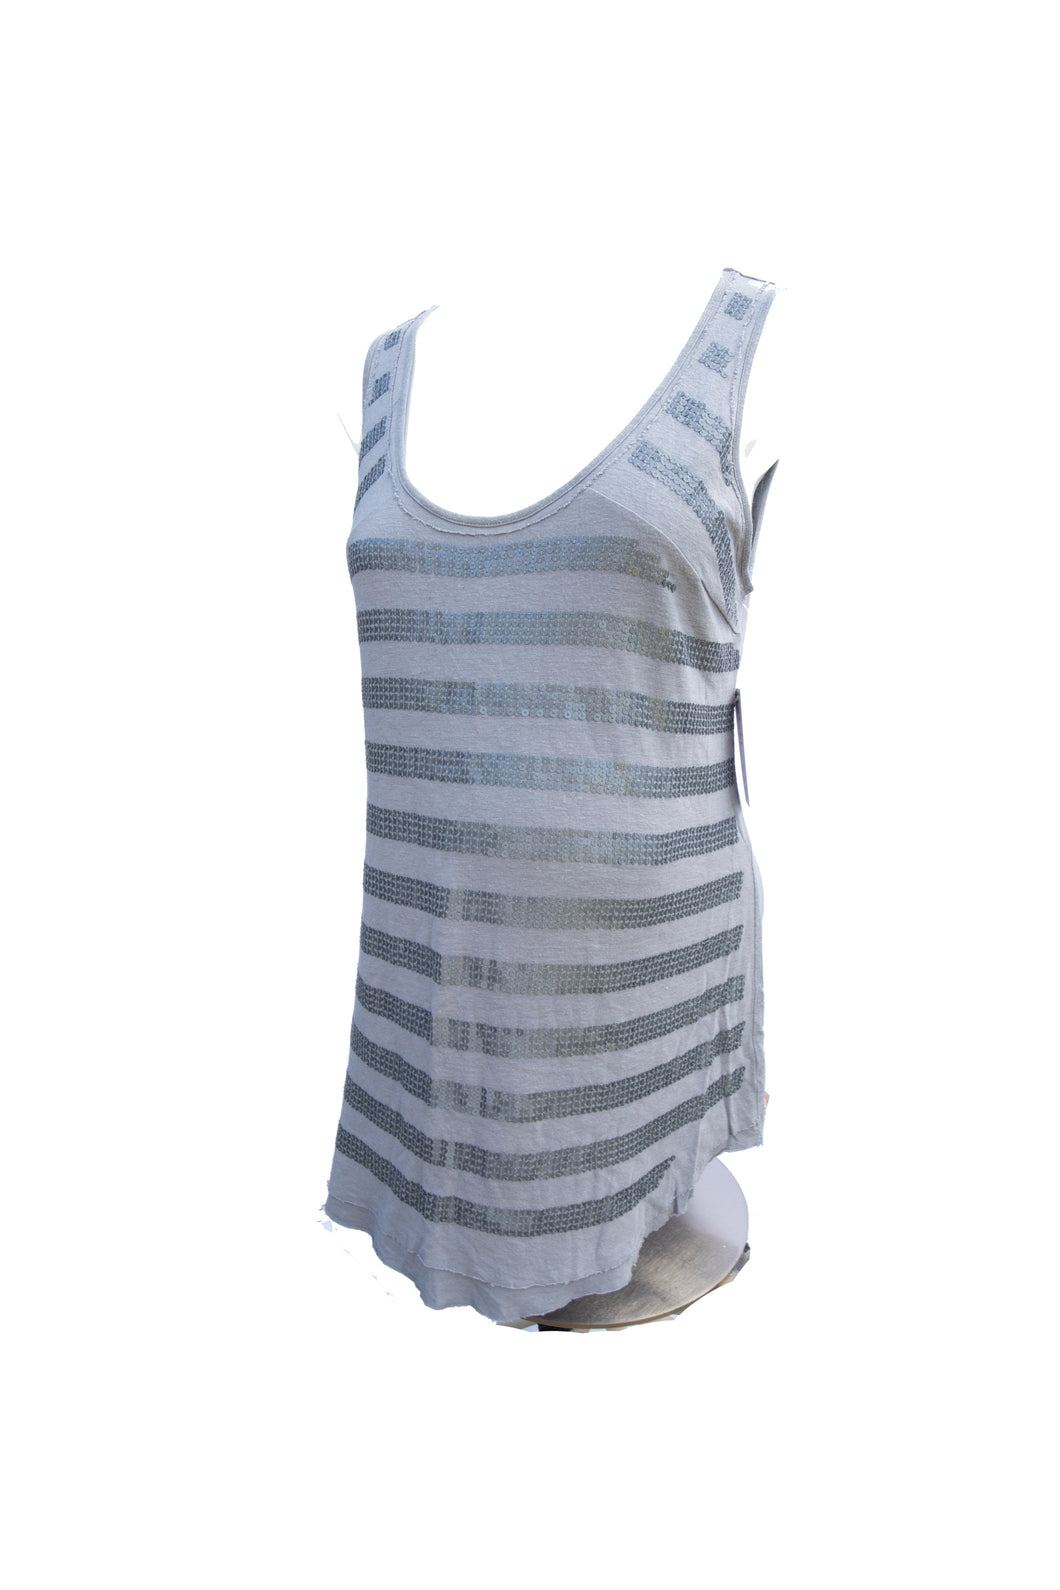 Liz Lang maternity tank top in grey with sequence. maternity clothes summer pregnancy